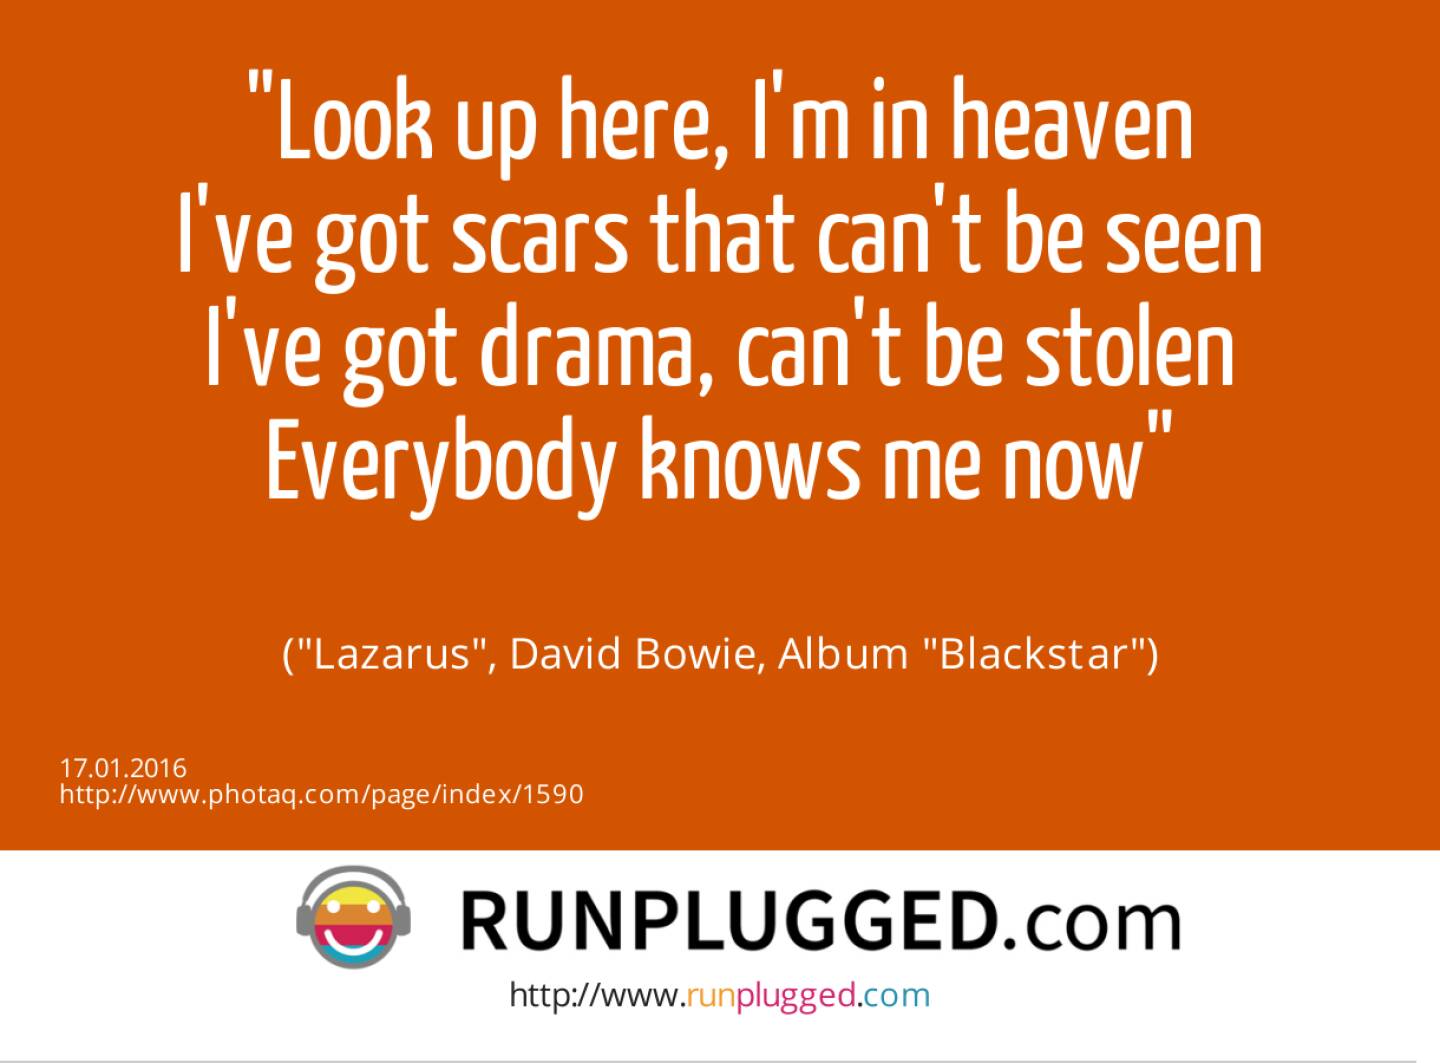 16.1. Look up here, I'm in heaven<br>I've got scars that can't be seen<br>I've got drama, can't be stolen<br>Everybody knows me now<br><br> (Lazarus, David Bowie, Album Blackstar)